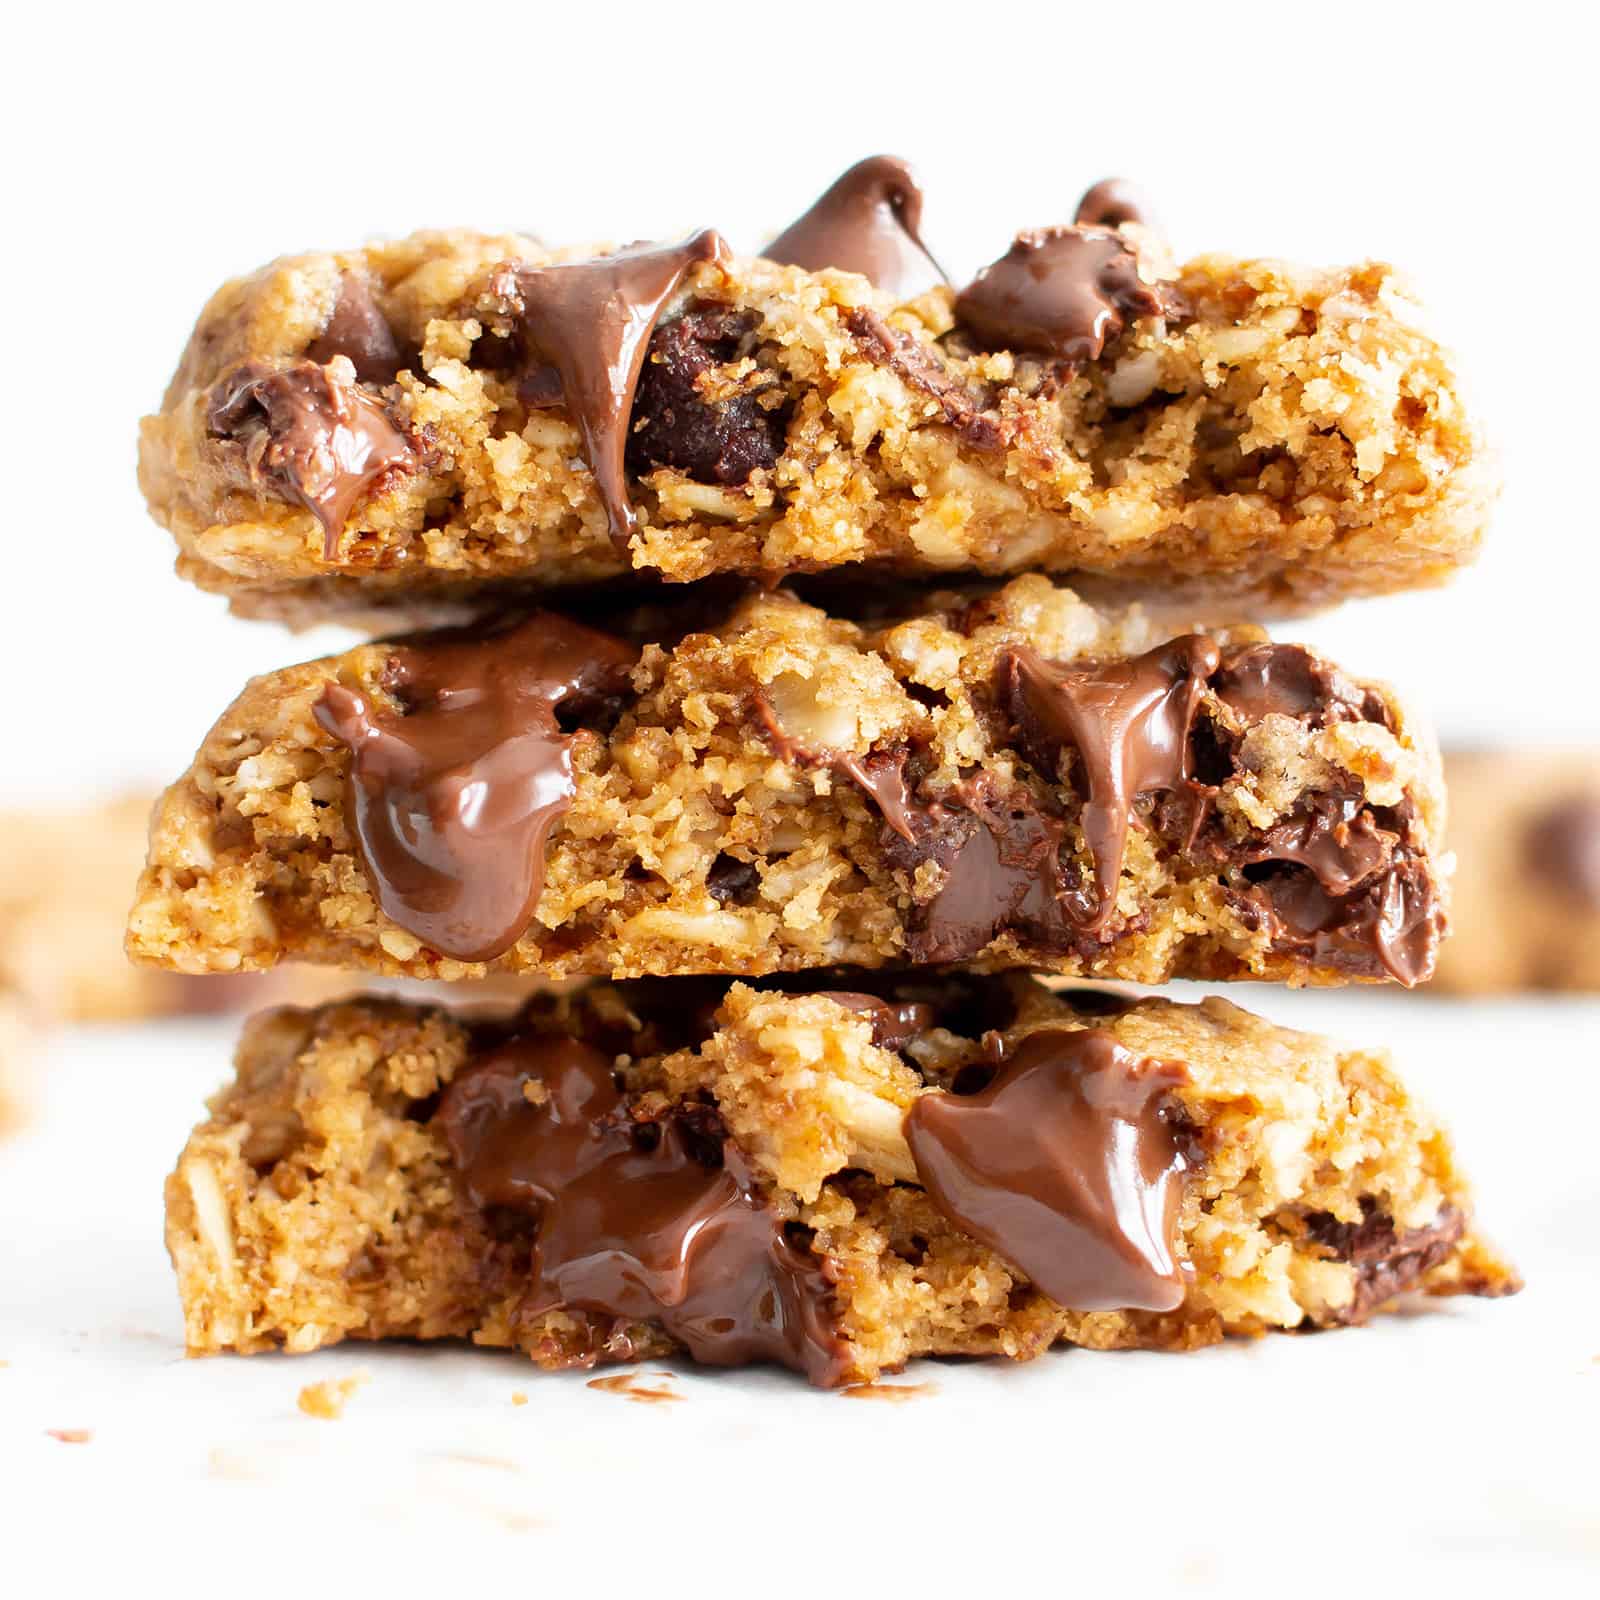 The BEST Gluten Free Oatmeal Chocolate Chip Cookies are crispy on the outside, perfectly chewy ‘n soft on the inside, and packed with cozy oatmeal & rich chocolate chip flavor. #GlutenFree #OatmealChocolateChipCookies #OatmealCookies #GFCookies | Recipe at BeamingBaker.com